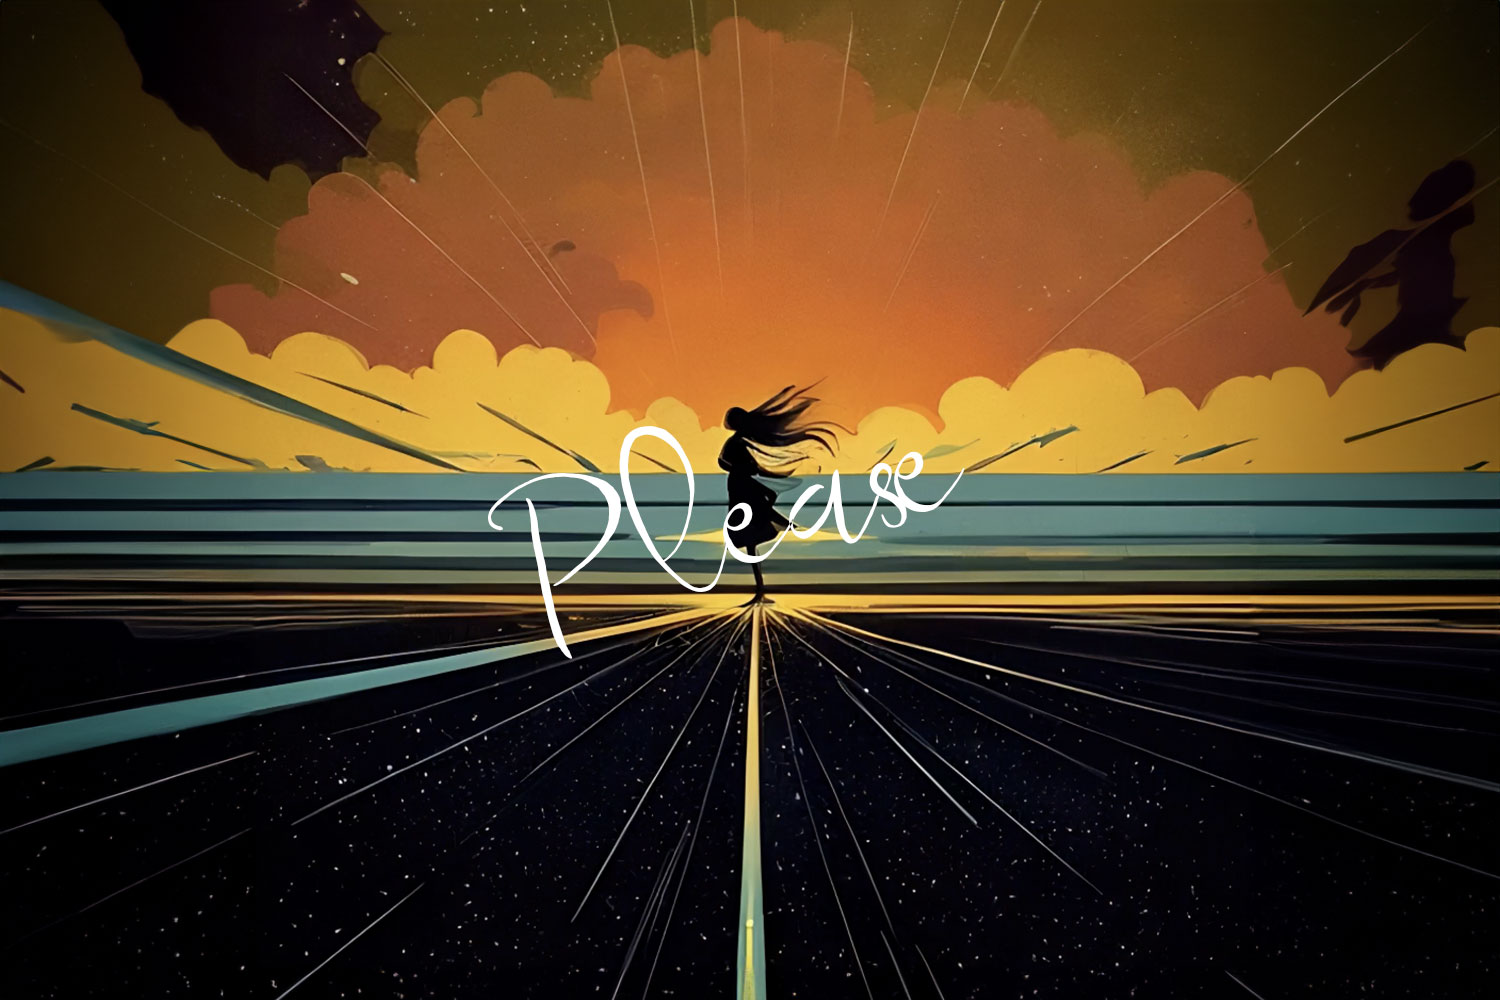 Our song, ‘Please’ – Video by Kaiber.ai